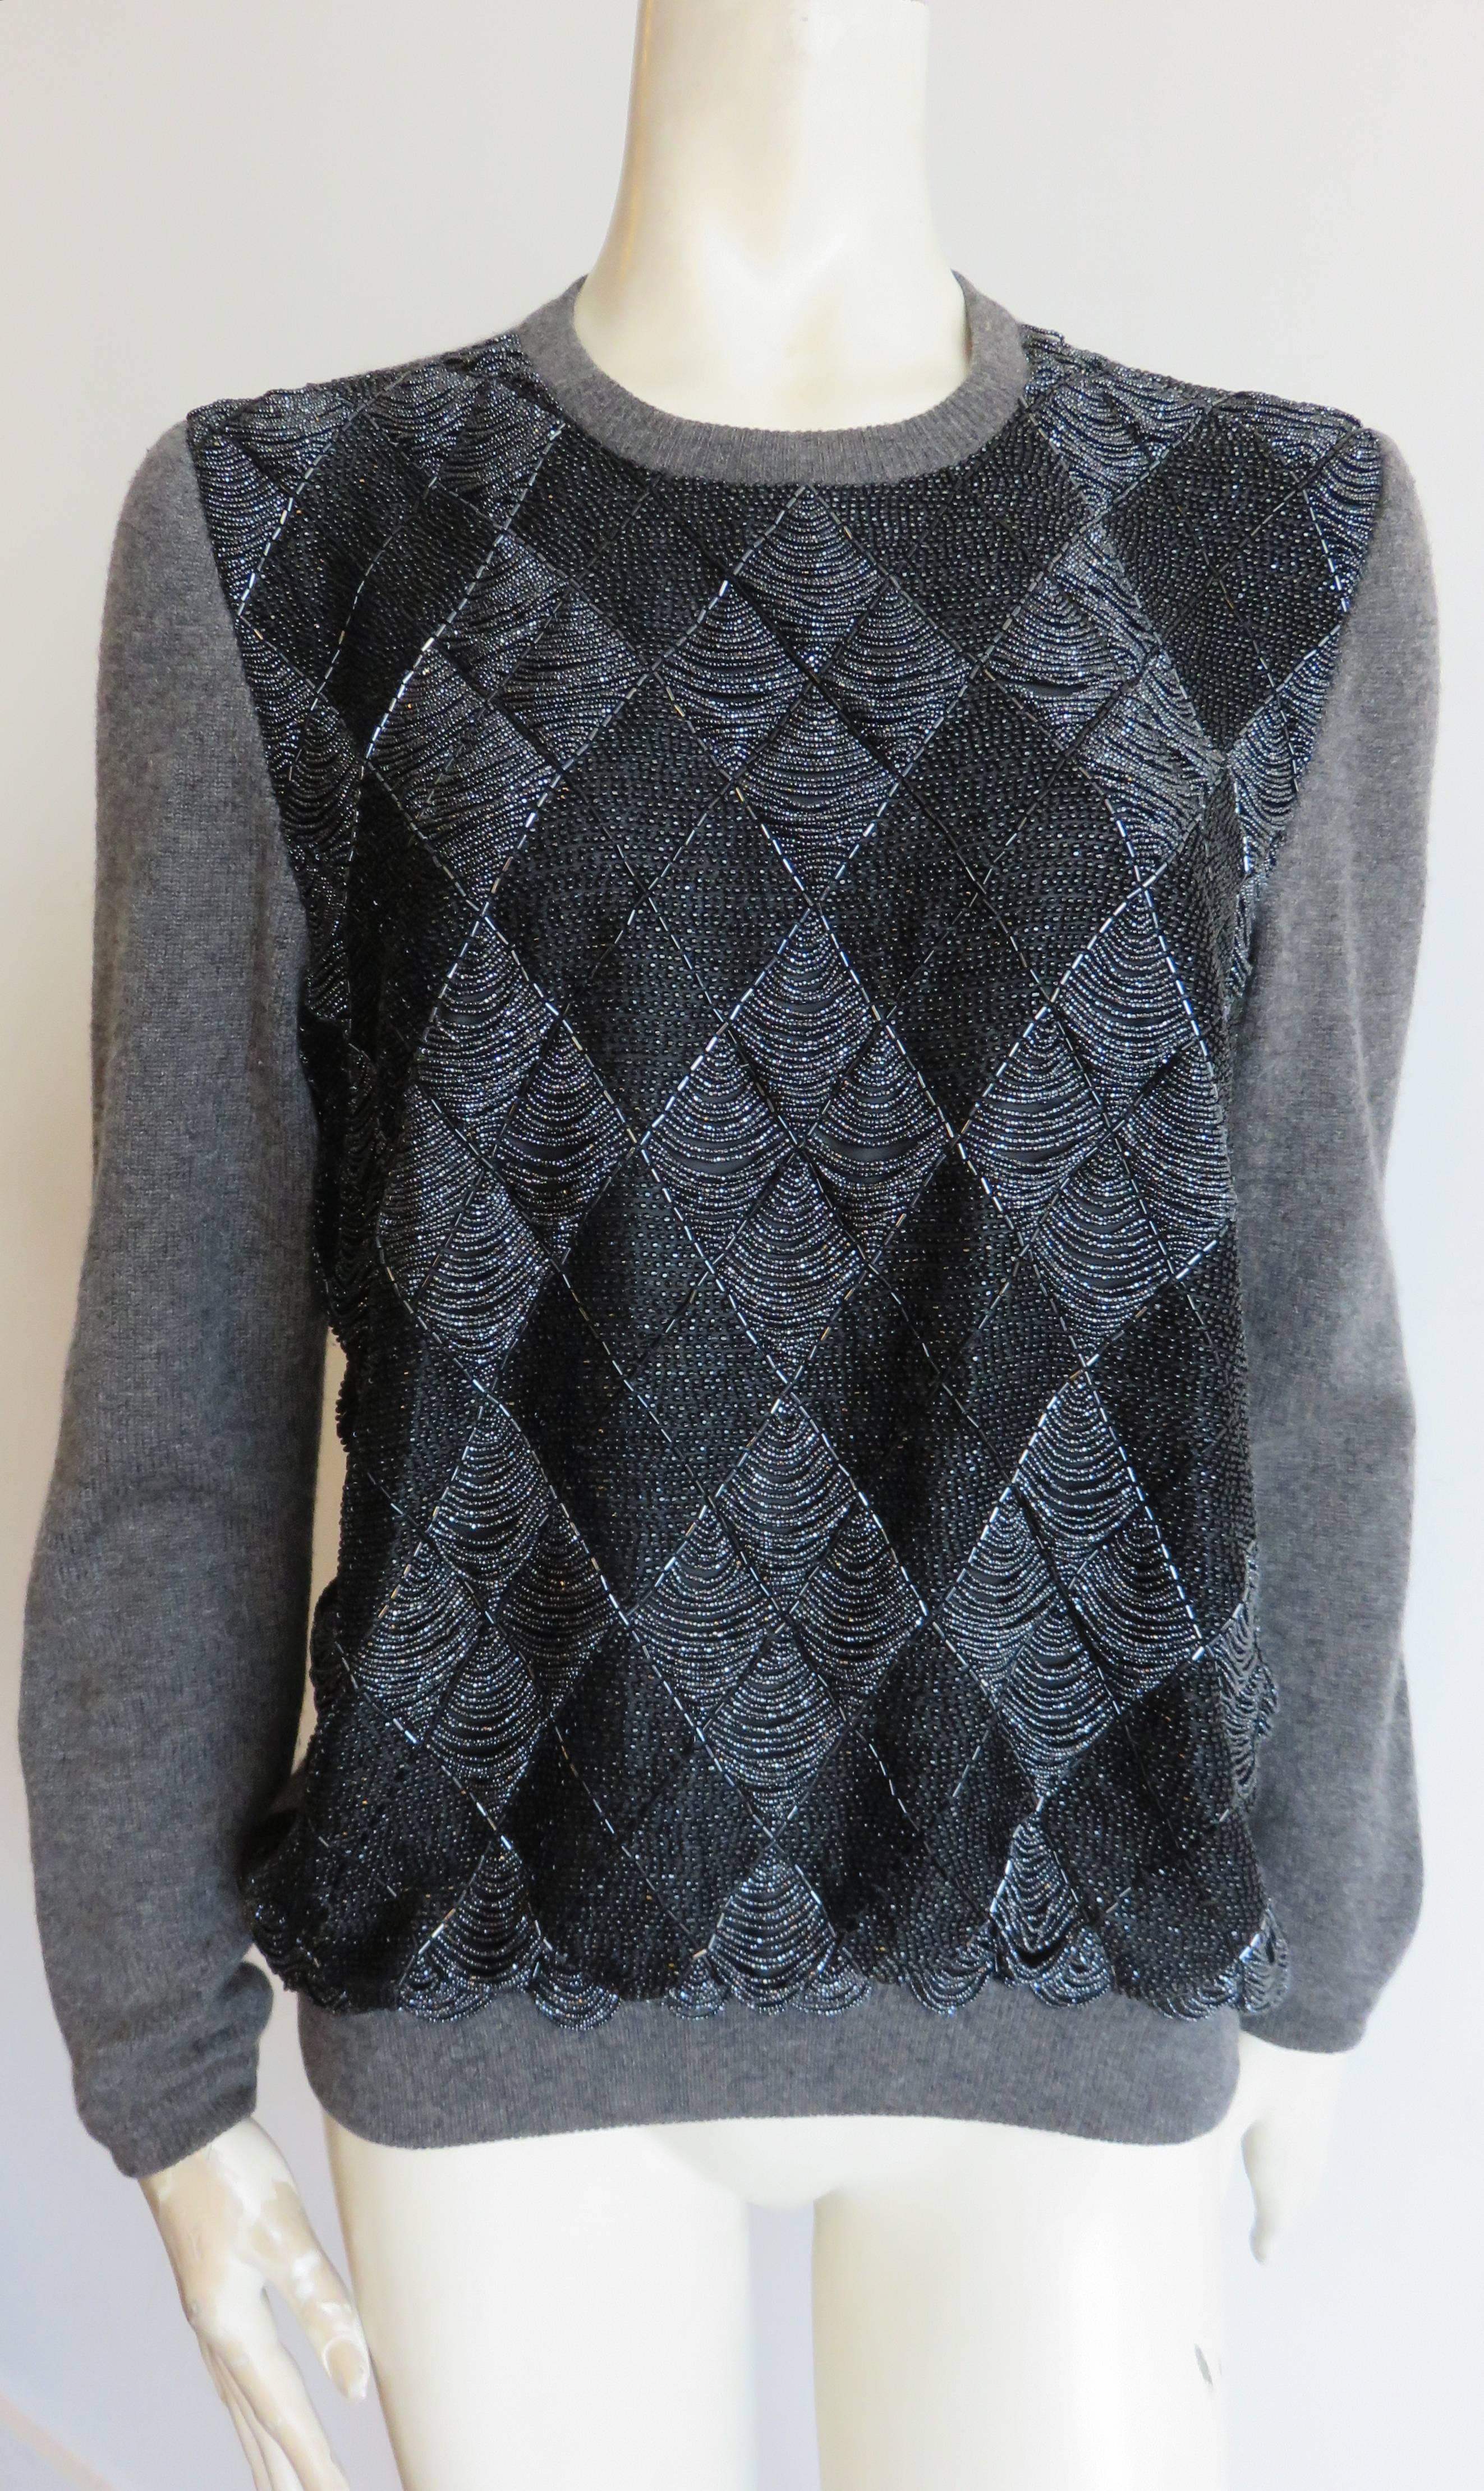 Excellent condition, 1980's, hand-beaded argyle sweater, attributed to Jean-Paul Gaultier.

Gray wool/cashmere, knit body with black, and gray, caviar beading at front panel.

Concealed, snap back placket at center-back neck.

In excellent